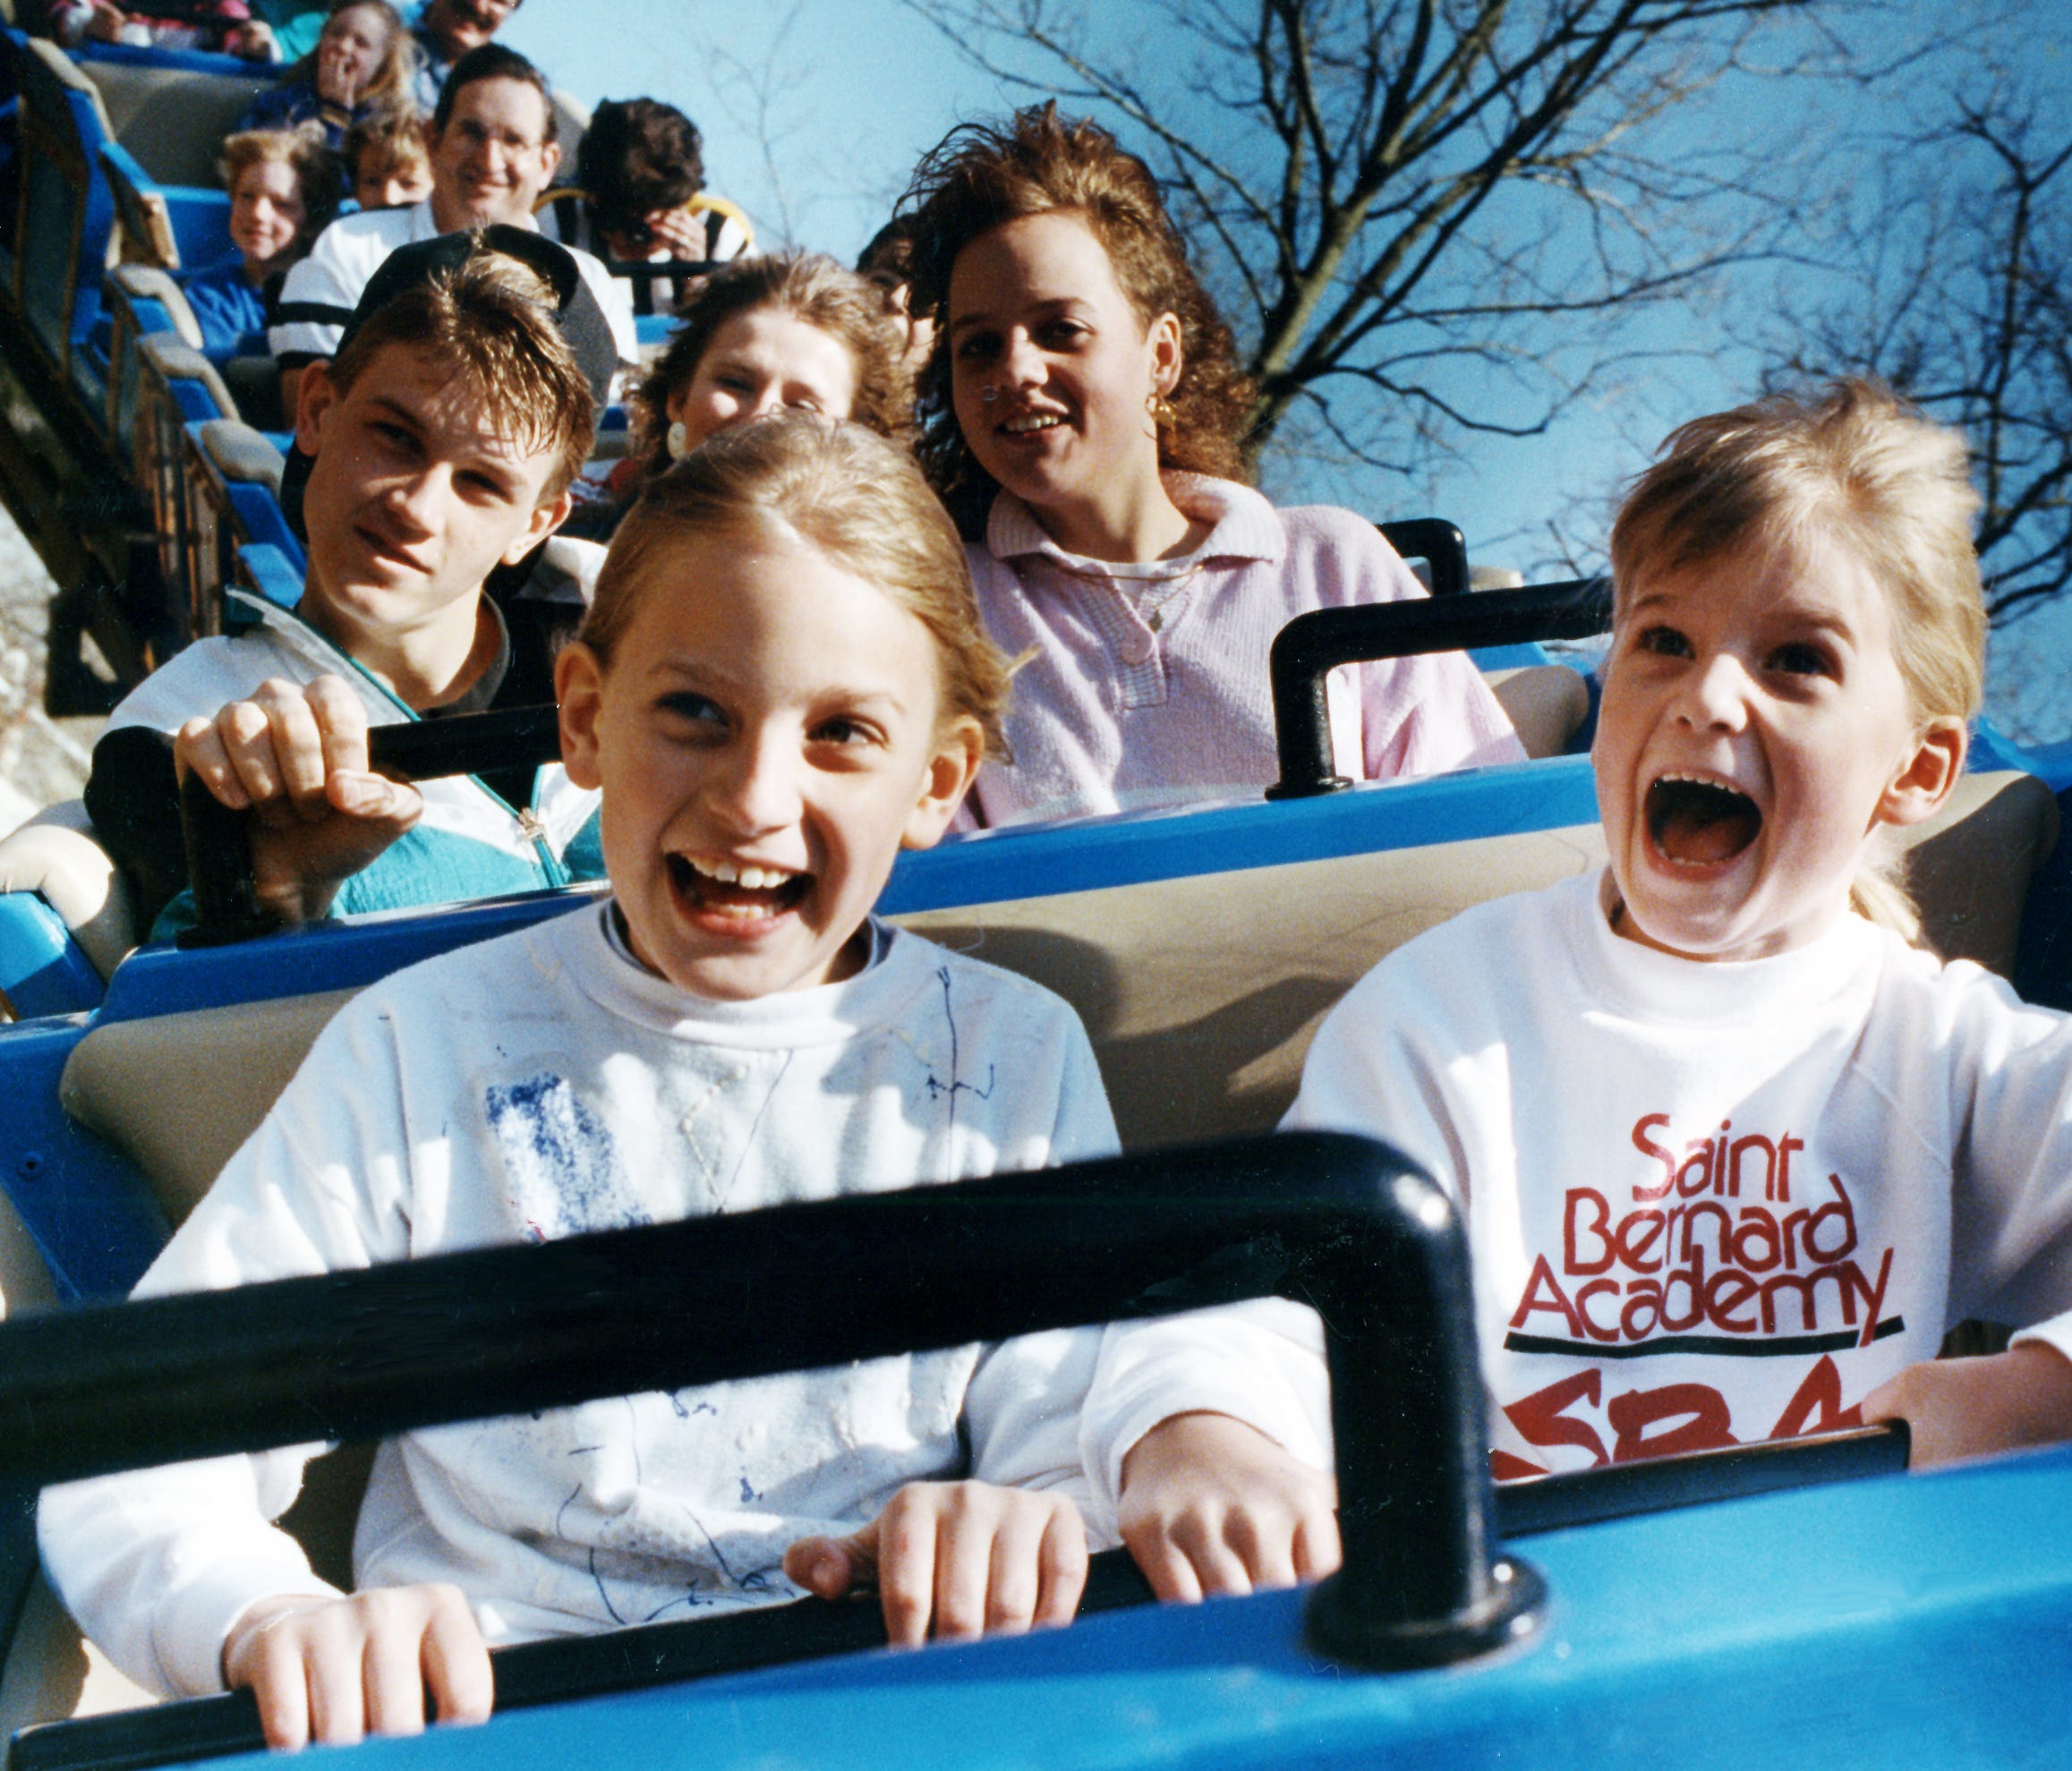 Jessica Logan, left, 10, and Kathryn Logan, 6, both of Nashville, scream with delight on the Rocking Roller Coaster at Opryland theme park. The park opened for it 20th anniversary season March 31, 1991.